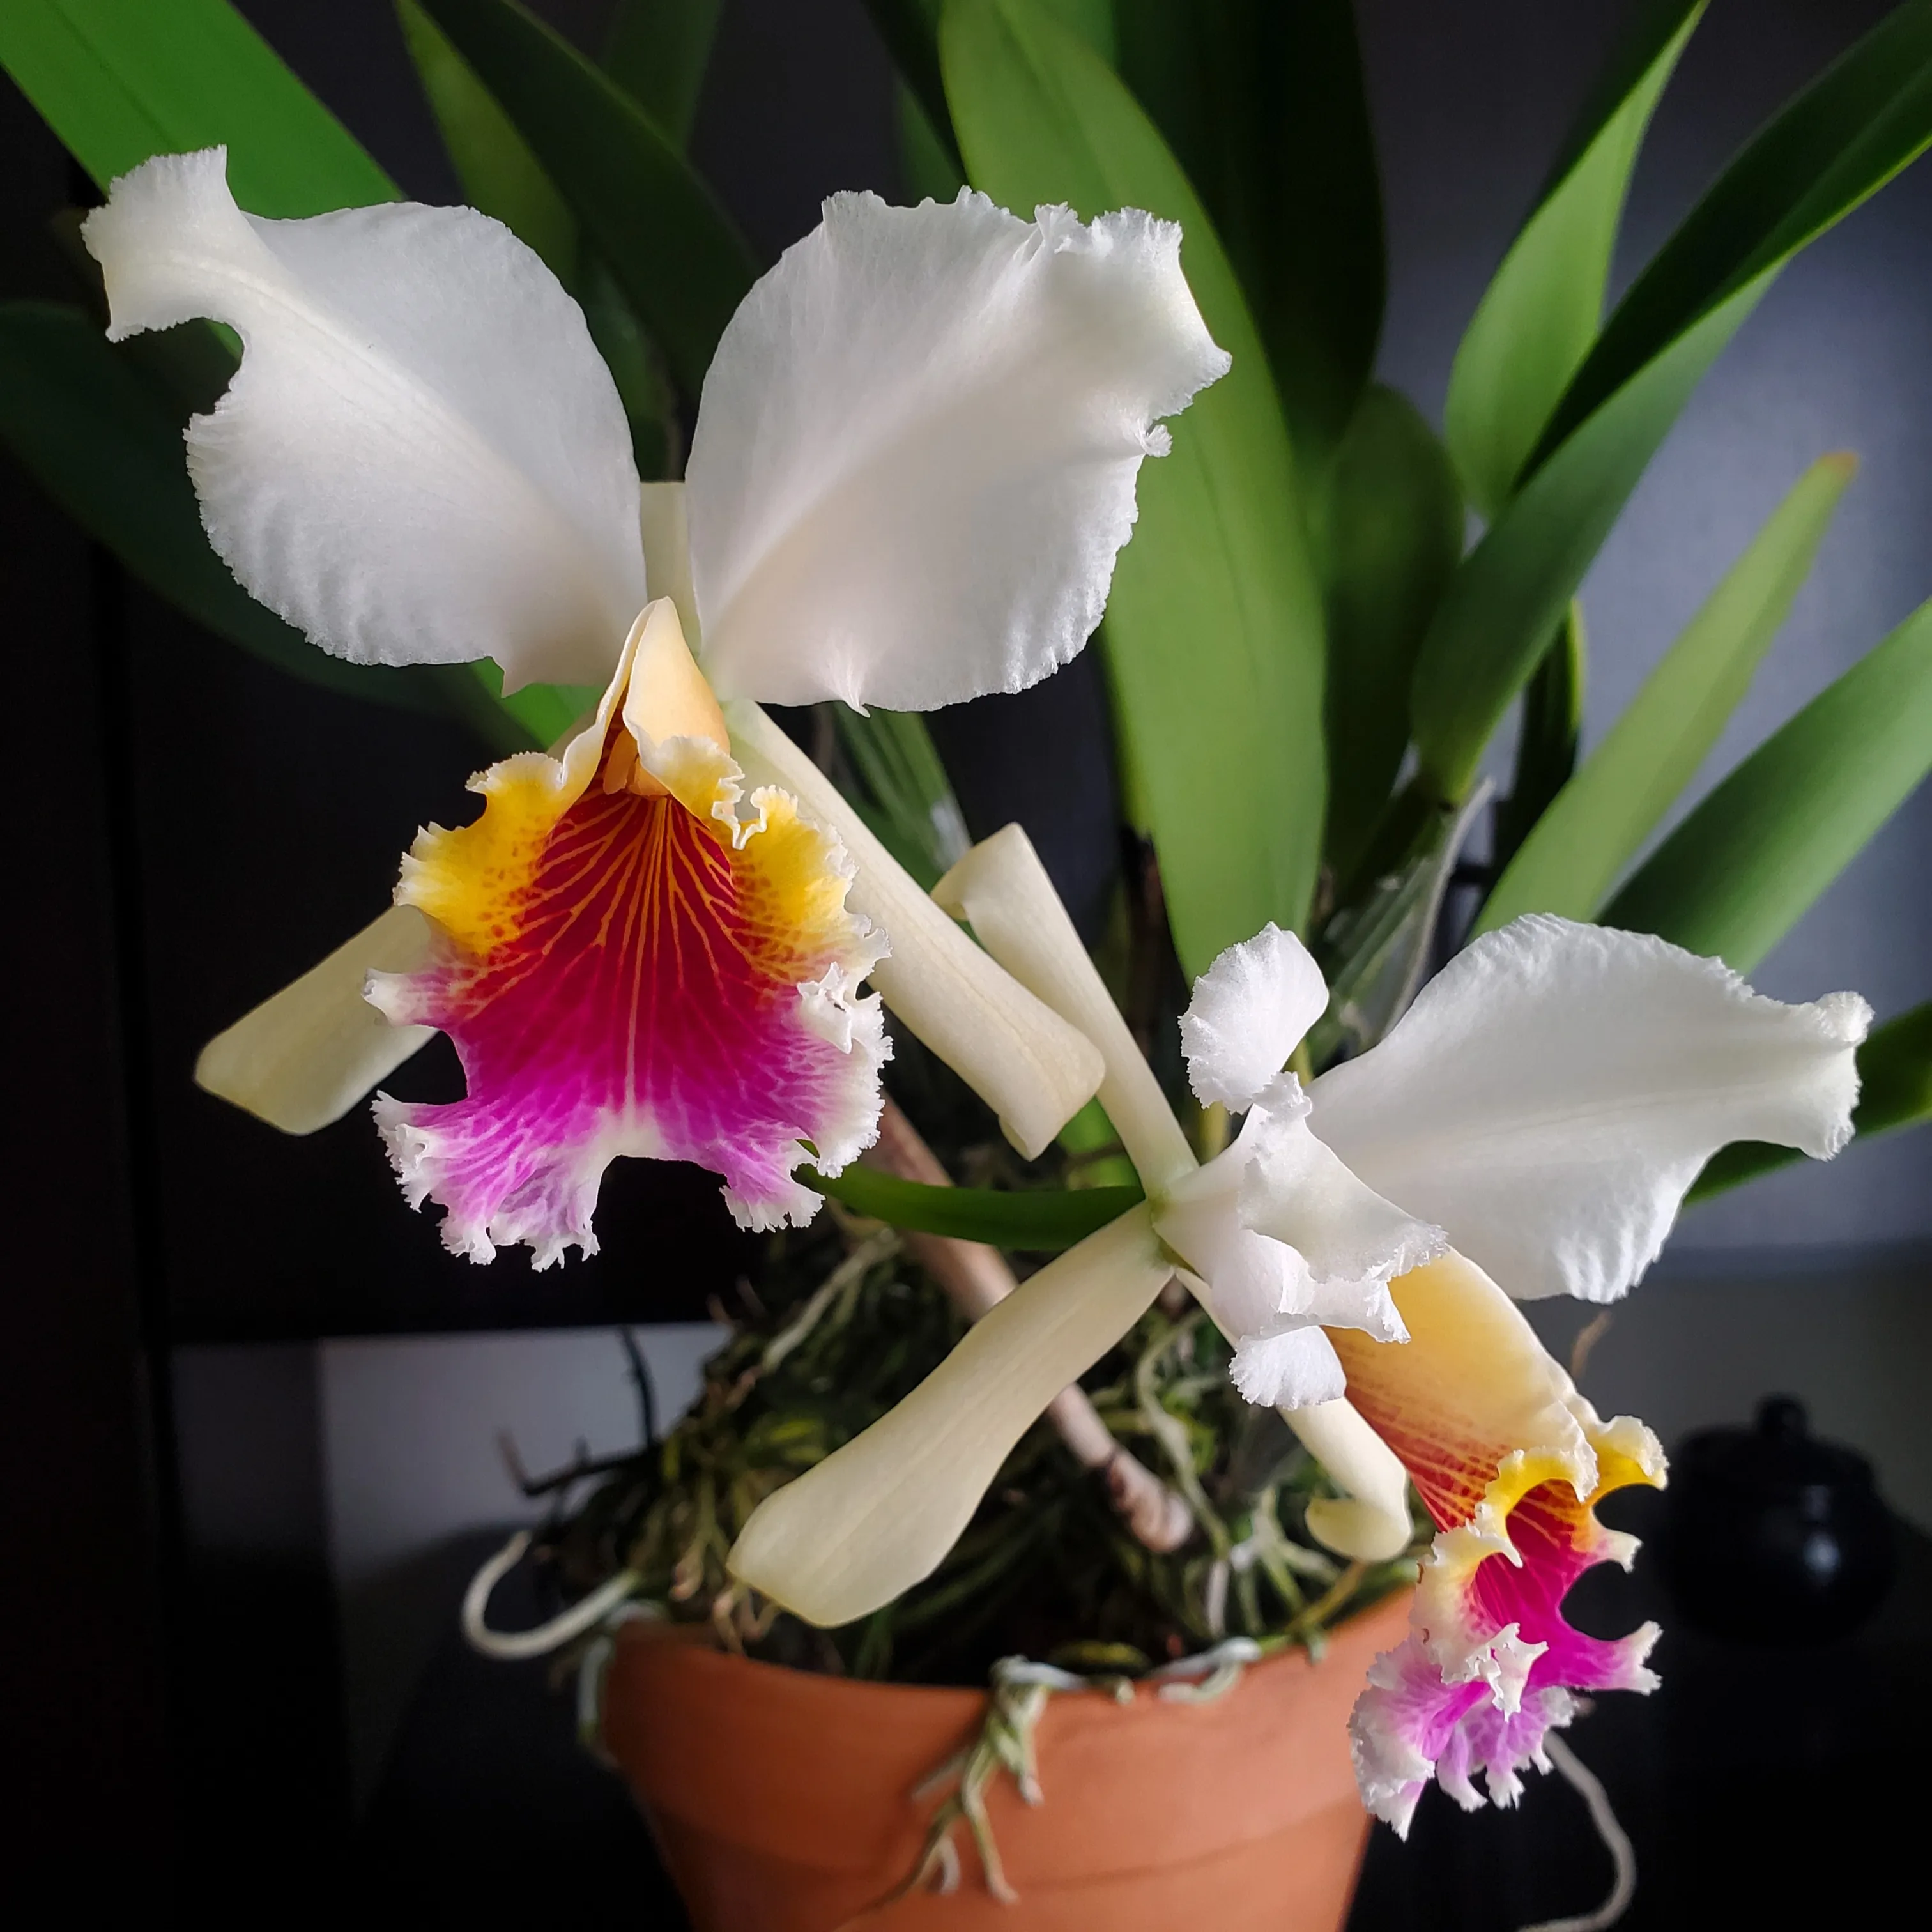 A Cattleya rex flower, white with yellow and magenta labellum